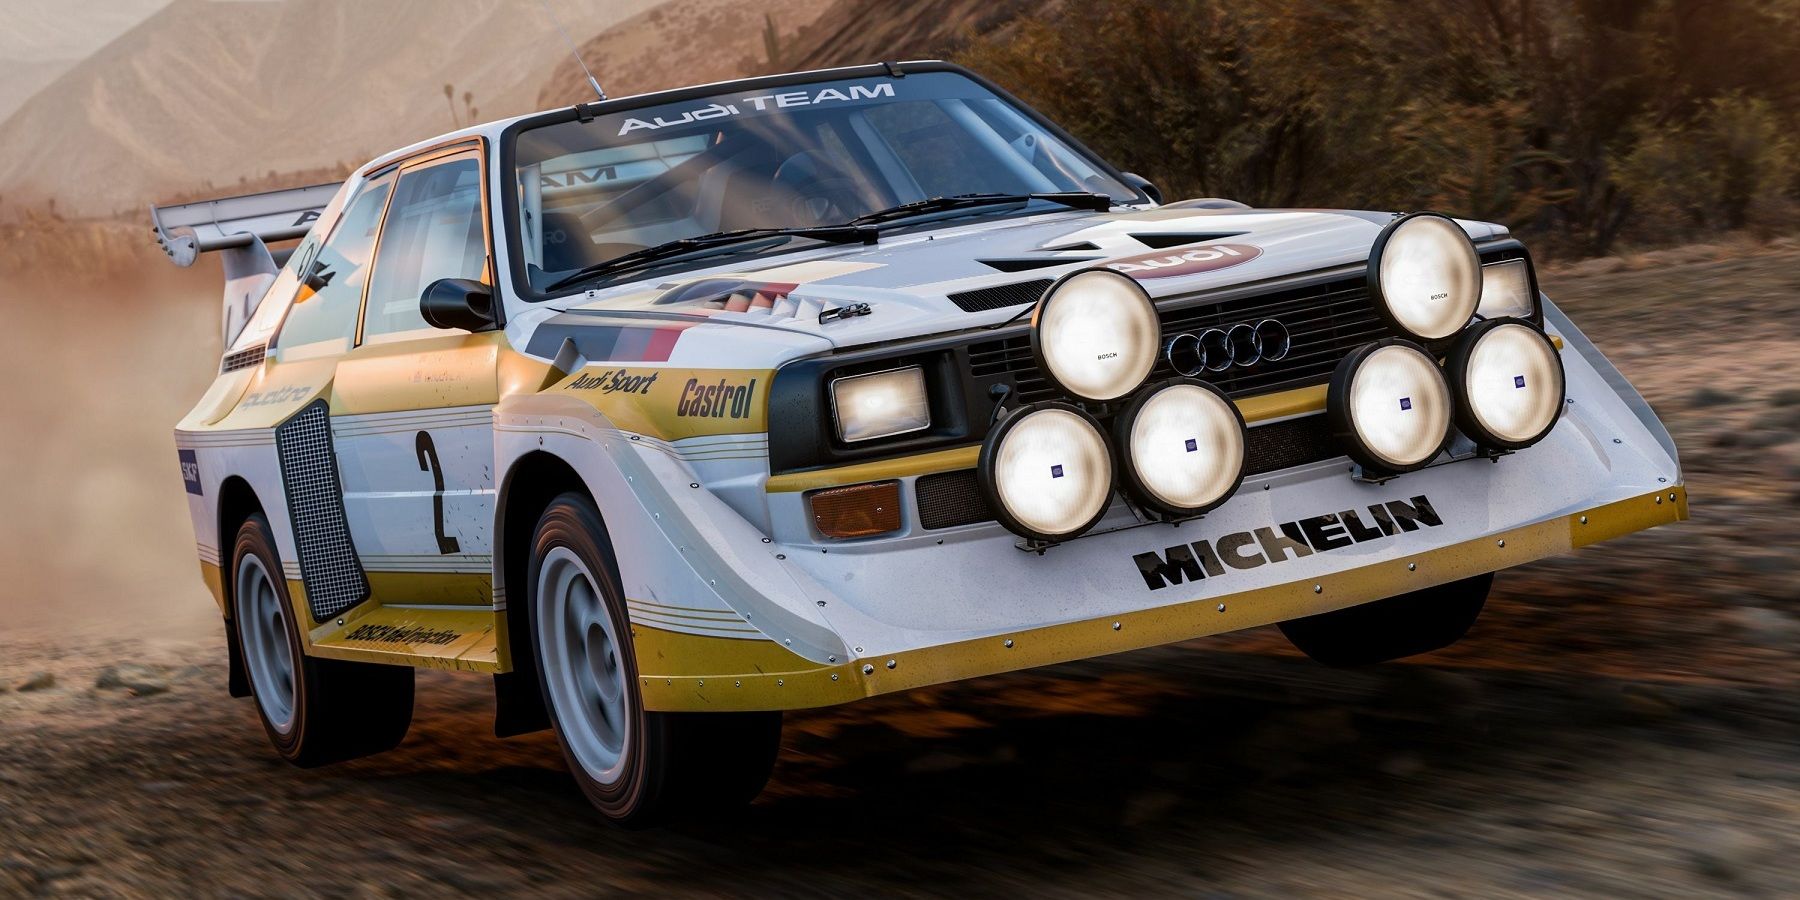 Free Rally Cars Coming to Forza Horizon 5 Ahead of New DLC